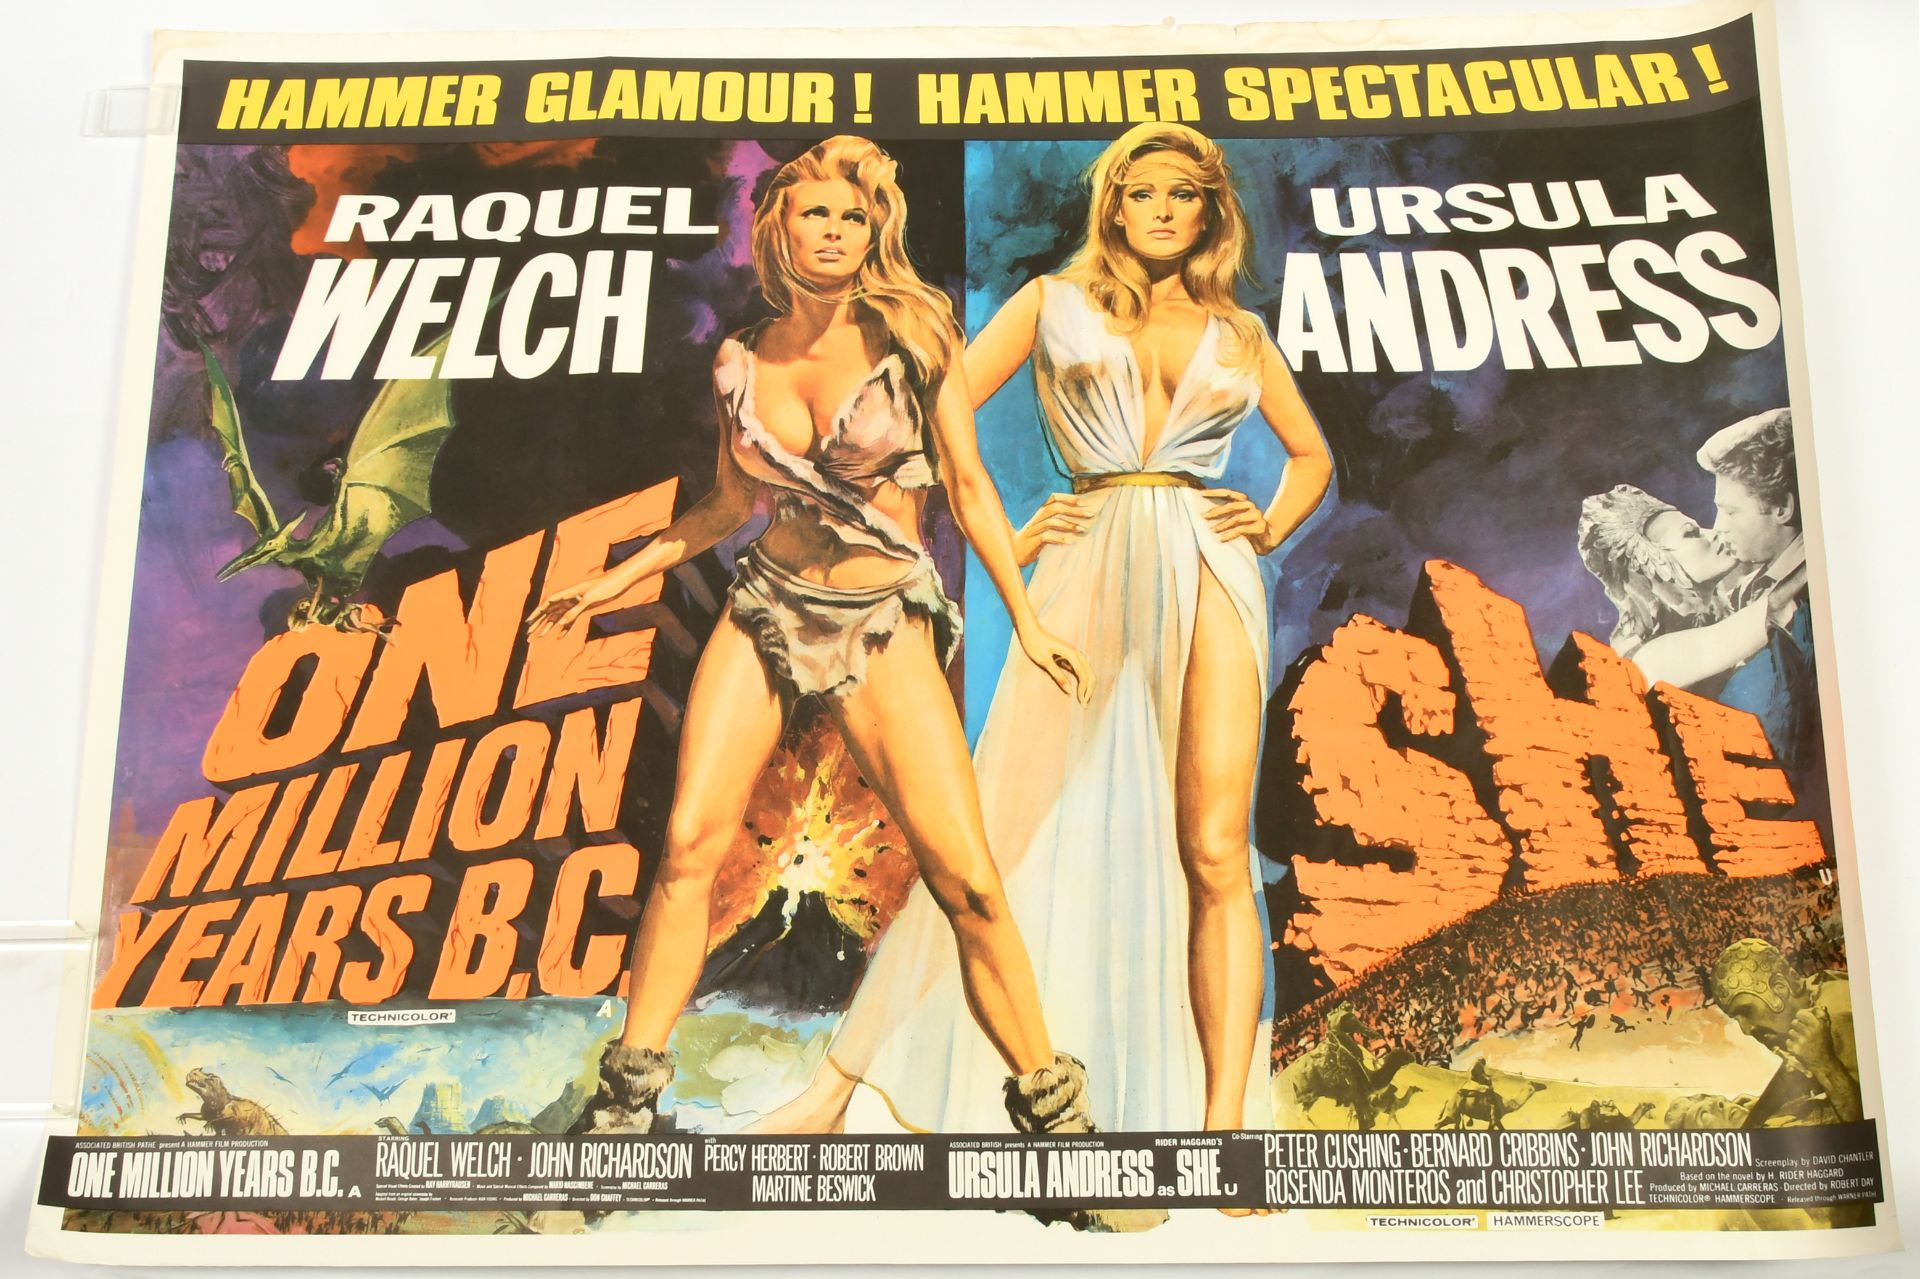 One Million Years BC and She double bill UK quad film poster